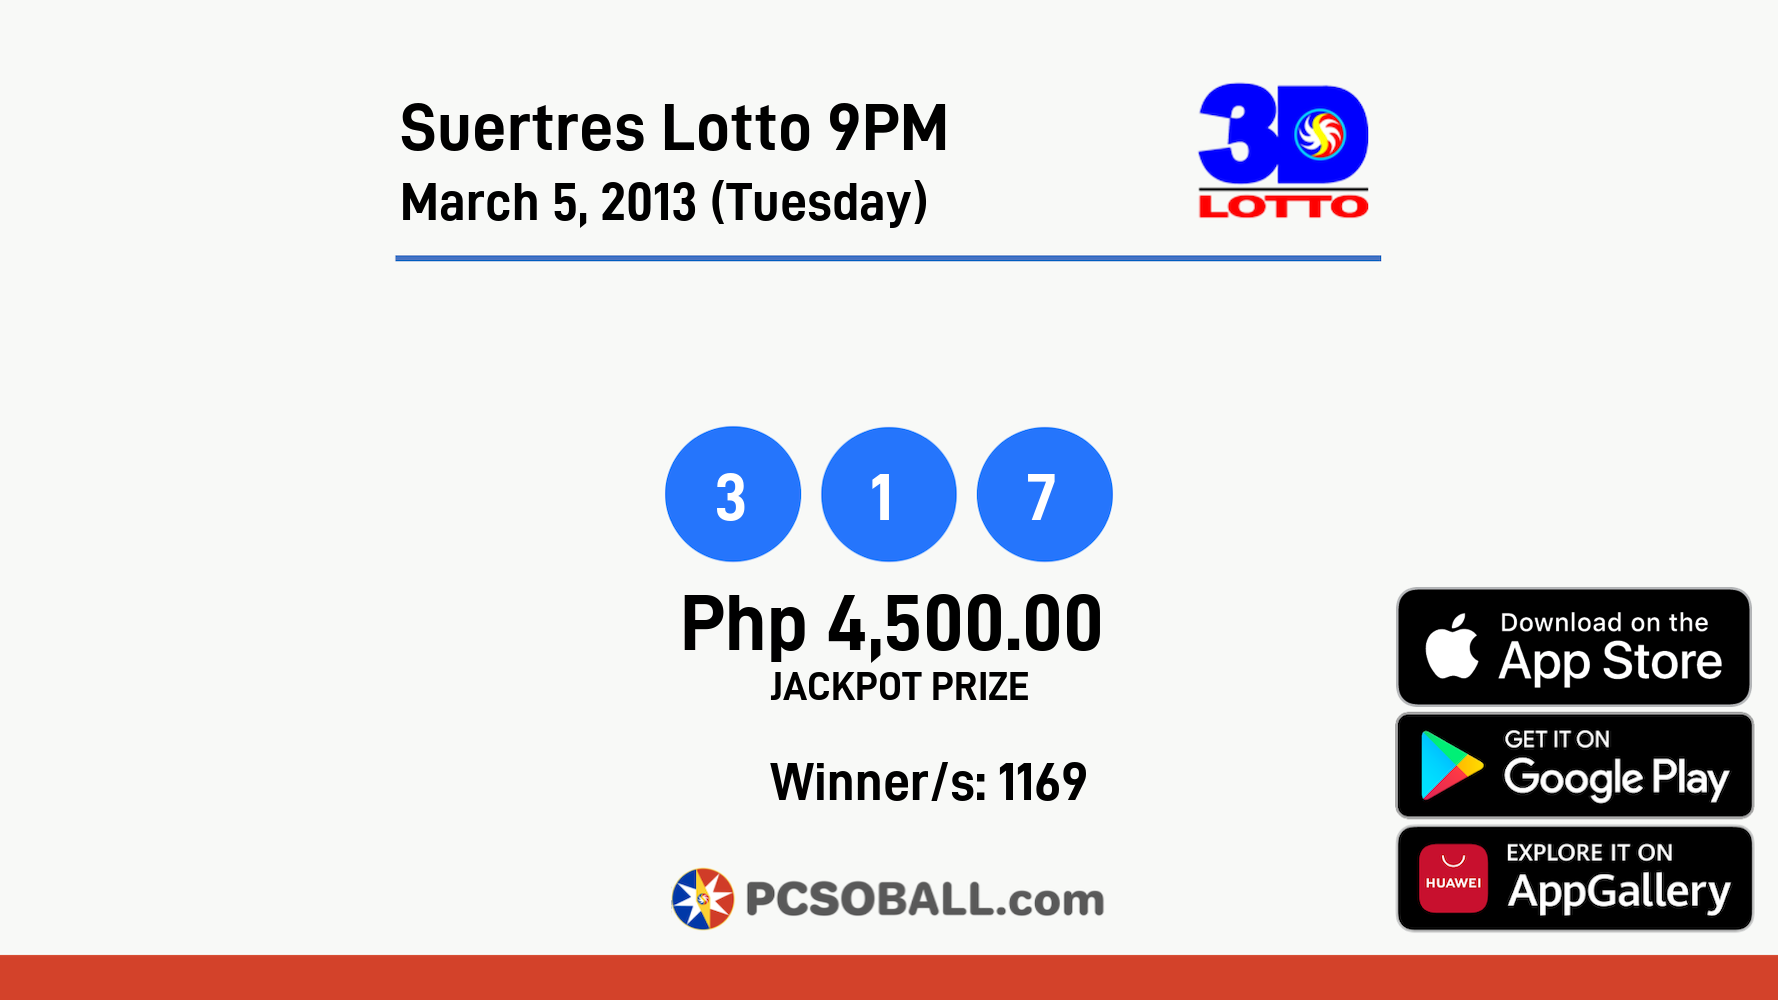 Suertres Lotto 9PM March 5, 2013 (Tuesday) Result